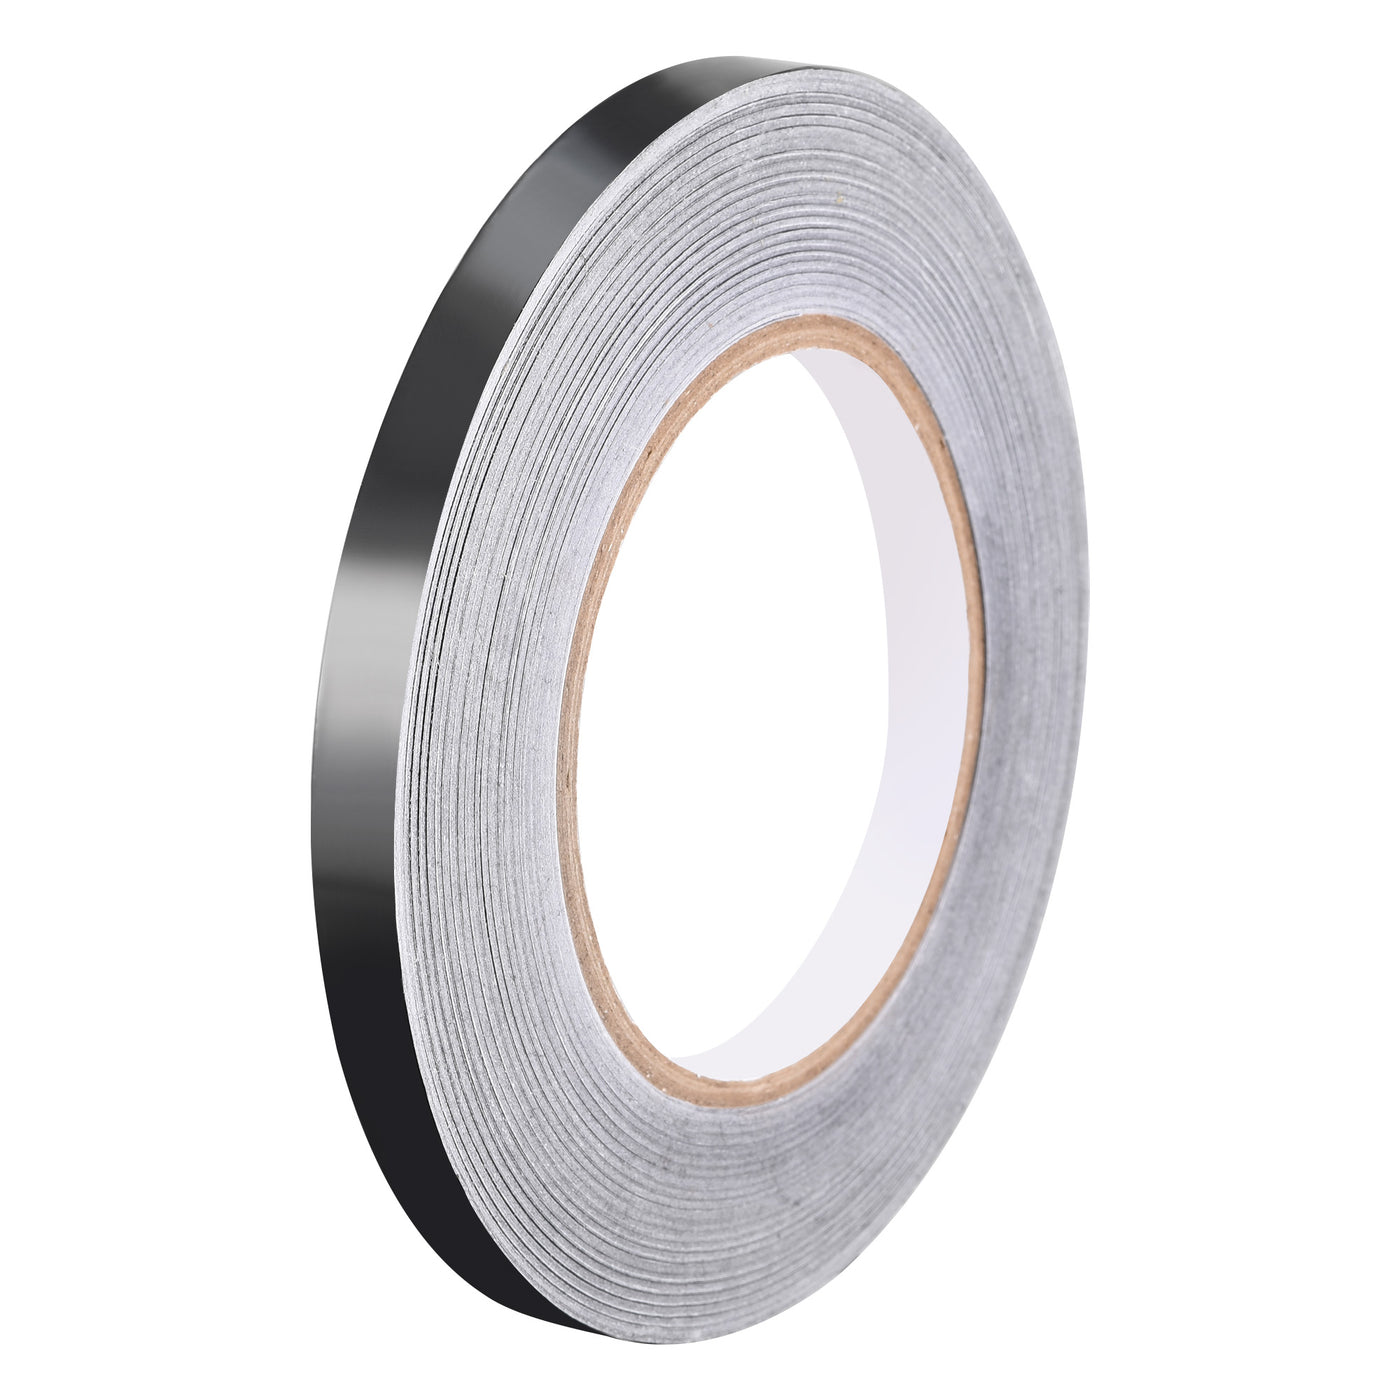 uxcell Uxcell 10mm Aluminum Foil Tape for HVAC, Patching Hot and Blocking light 50m/164ft